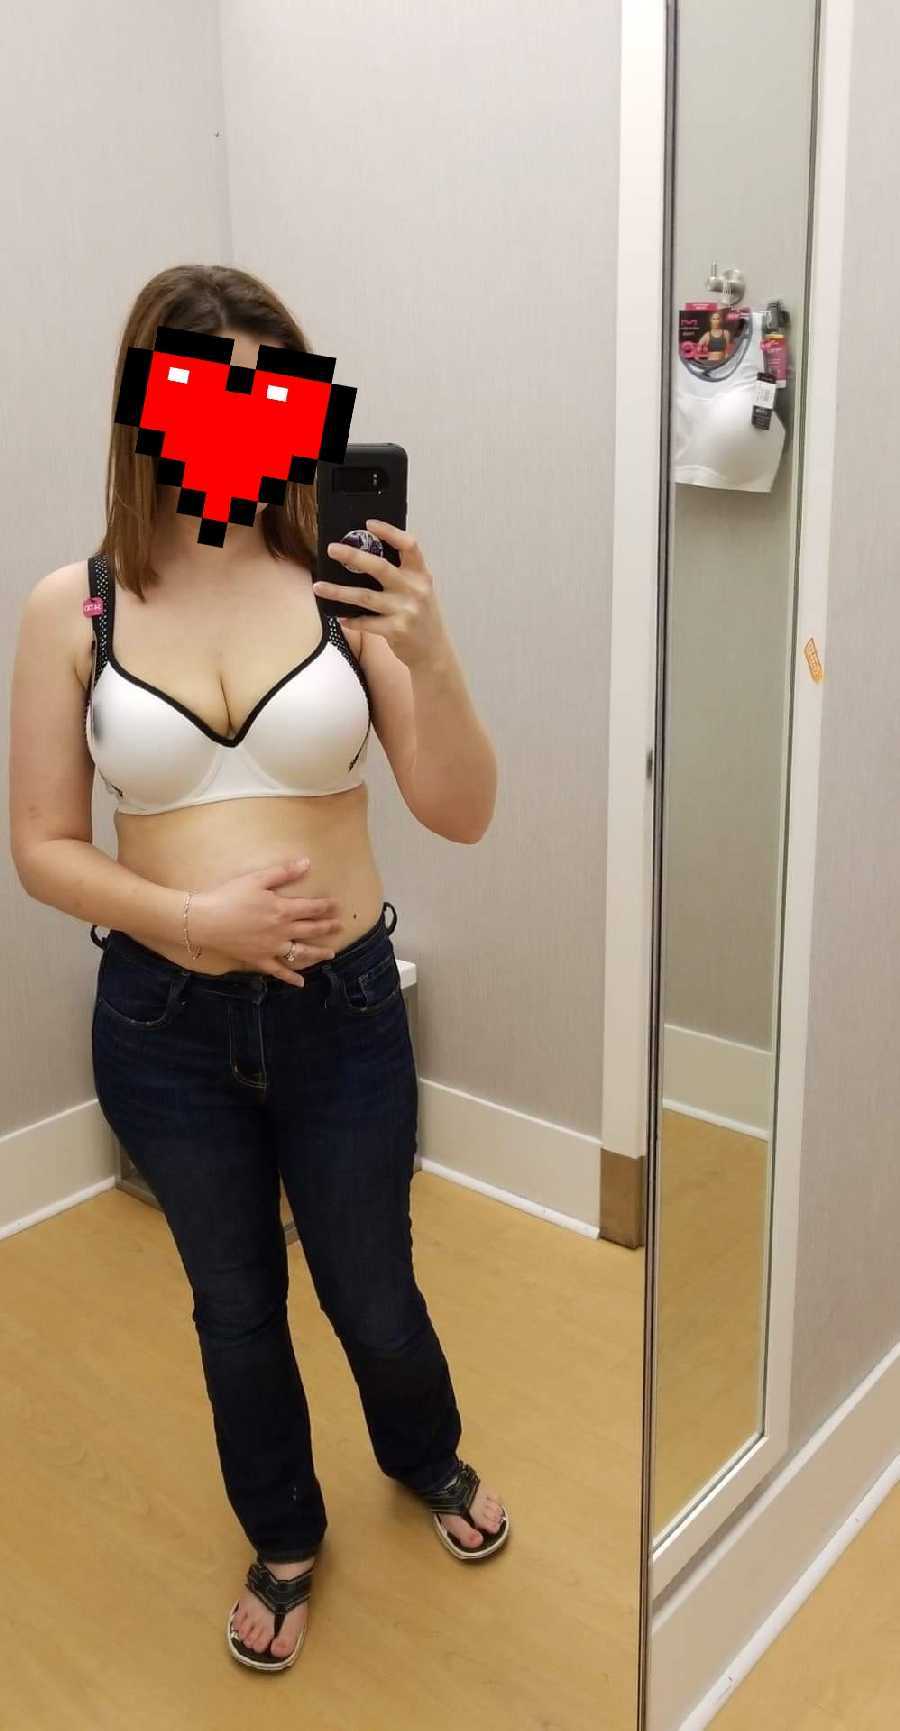 Changing Room Dare from Wife!